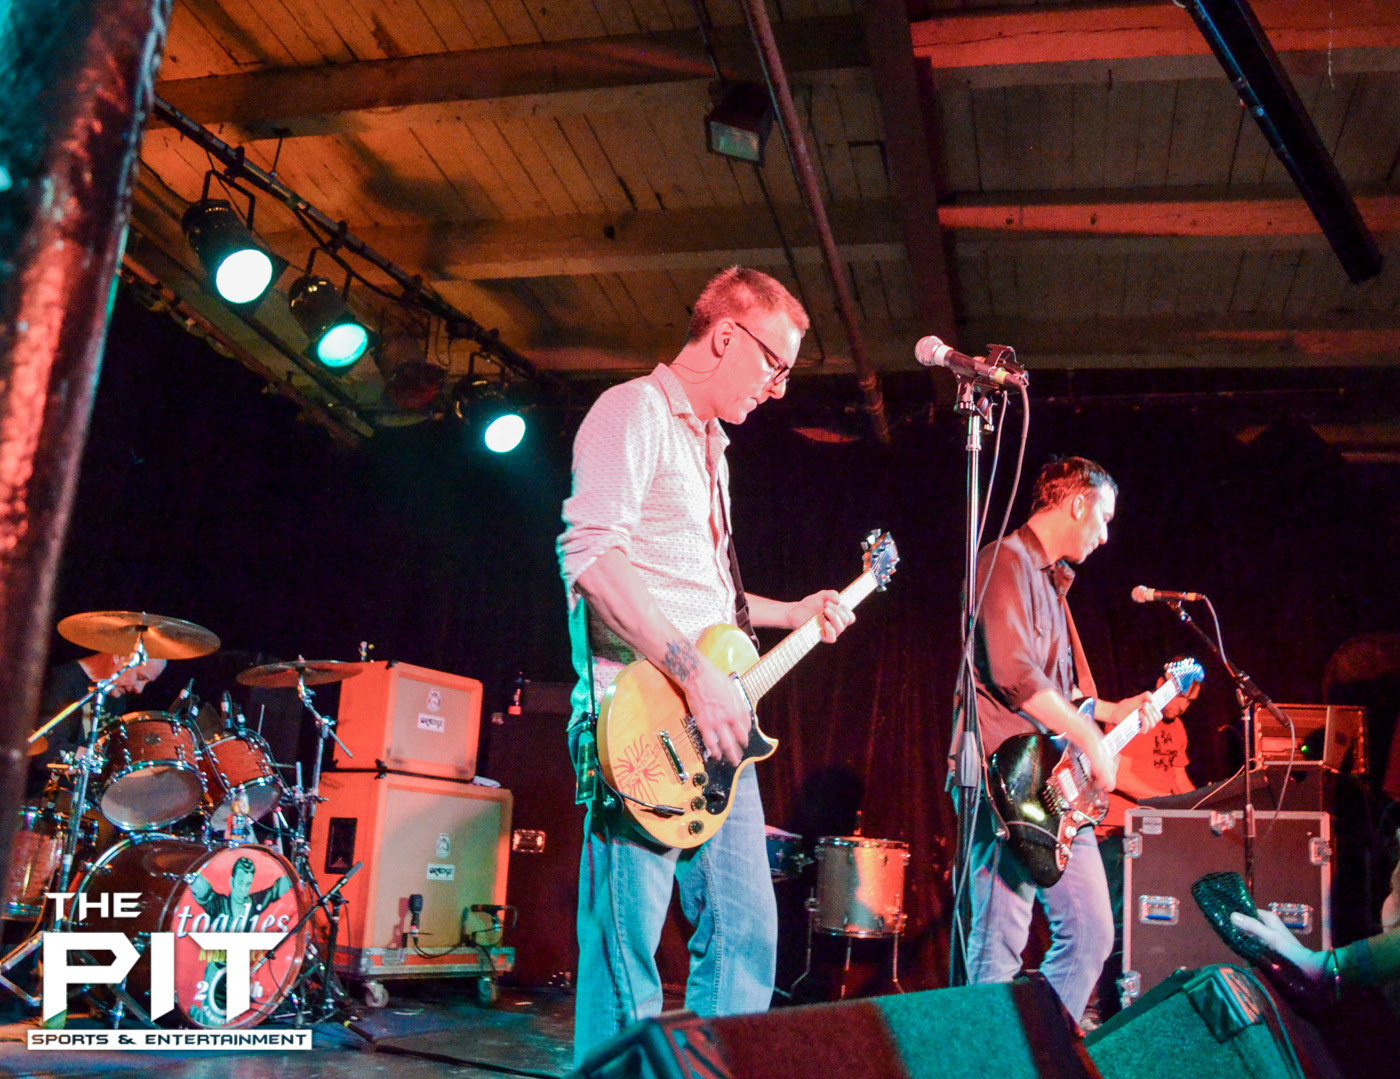 Texas Alternative Rock band Toadies put on a performance in support of their Rubberneck Tour at the Magic Stick in Detroit, MI on April 18, 2014. Jamie Limbright / The Pit: SE